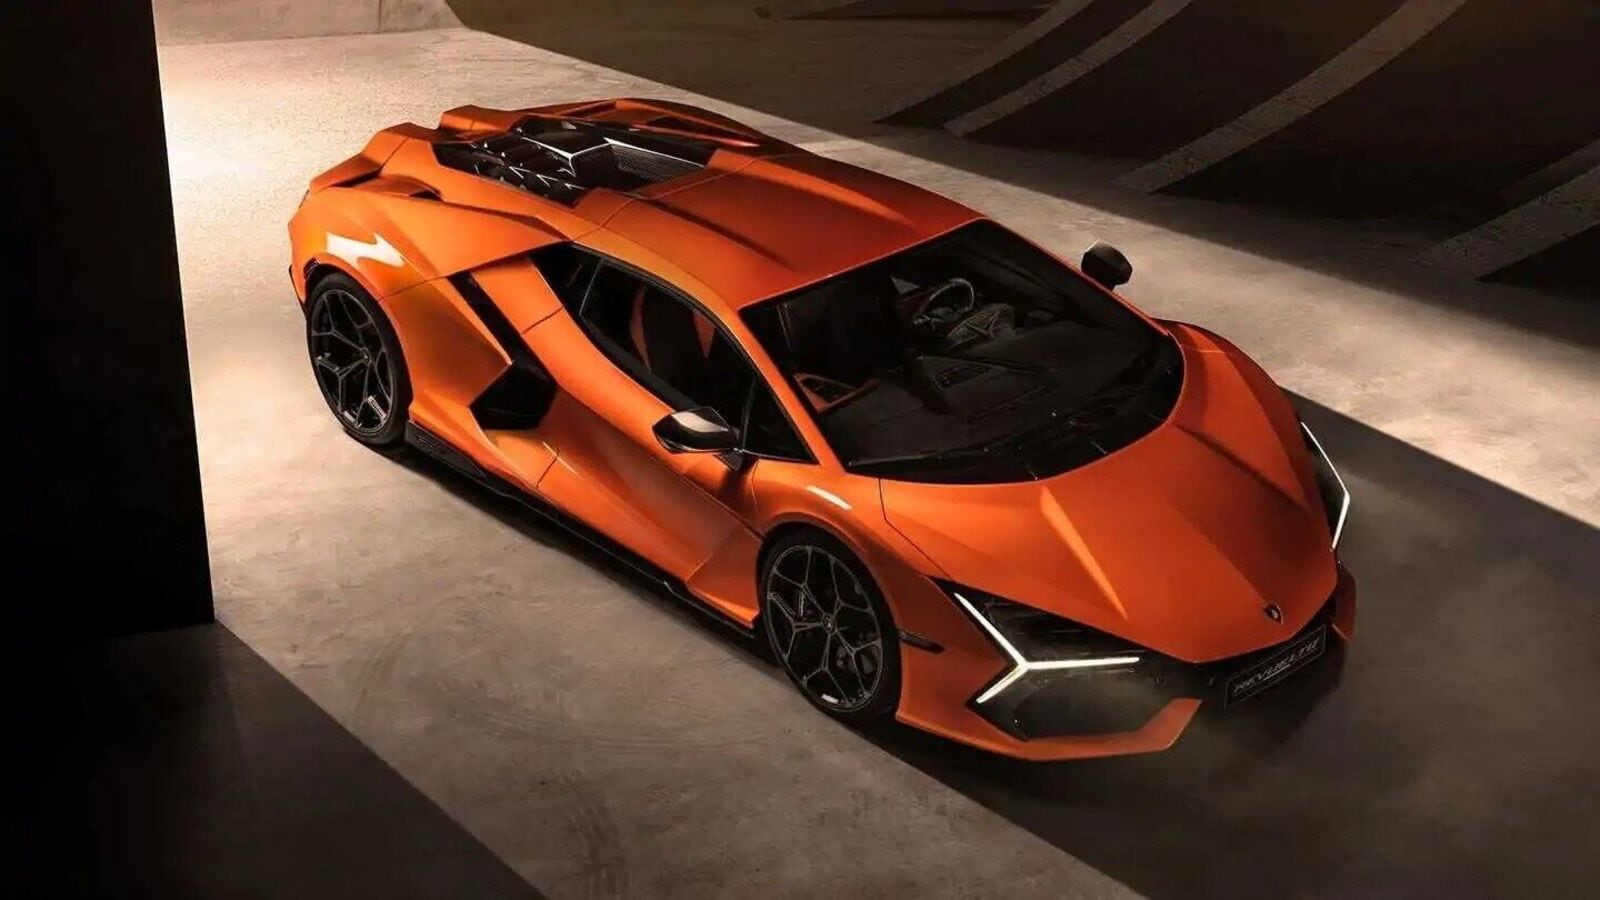 Lamborghini Revuelto leaked hours before official debut, replaces Aventador